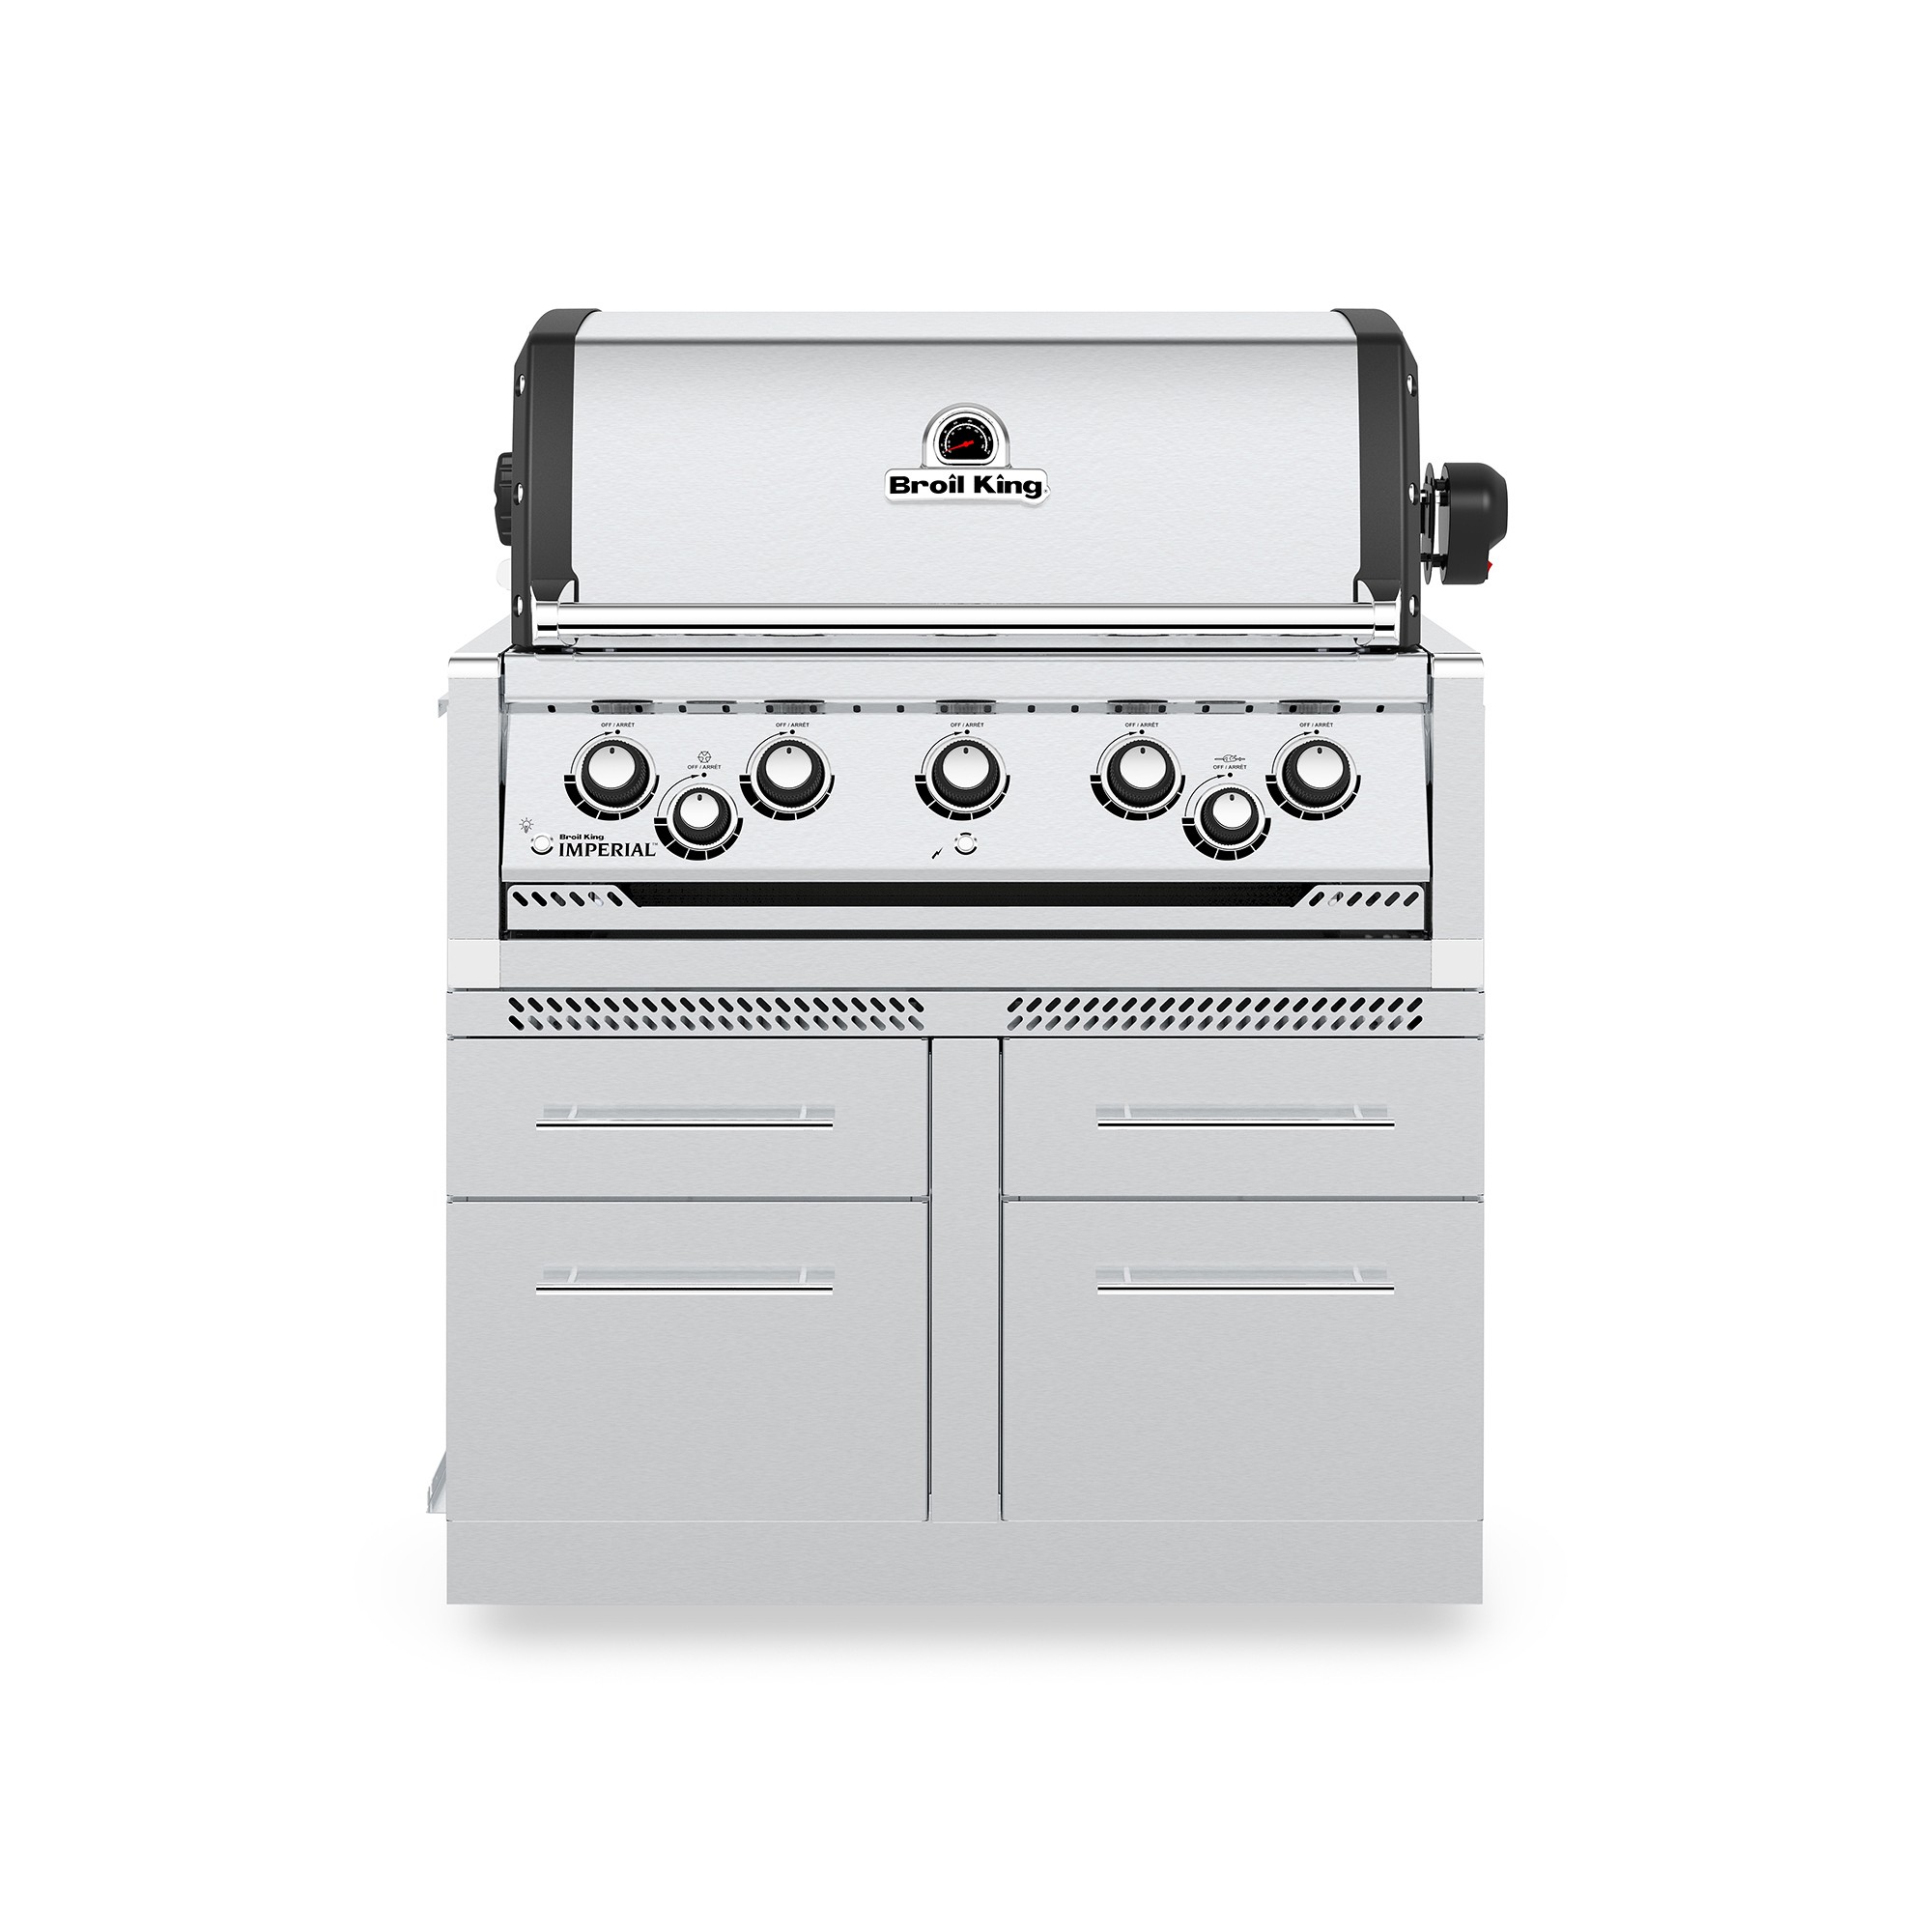 Broil King Regal S520 Built-In Grill